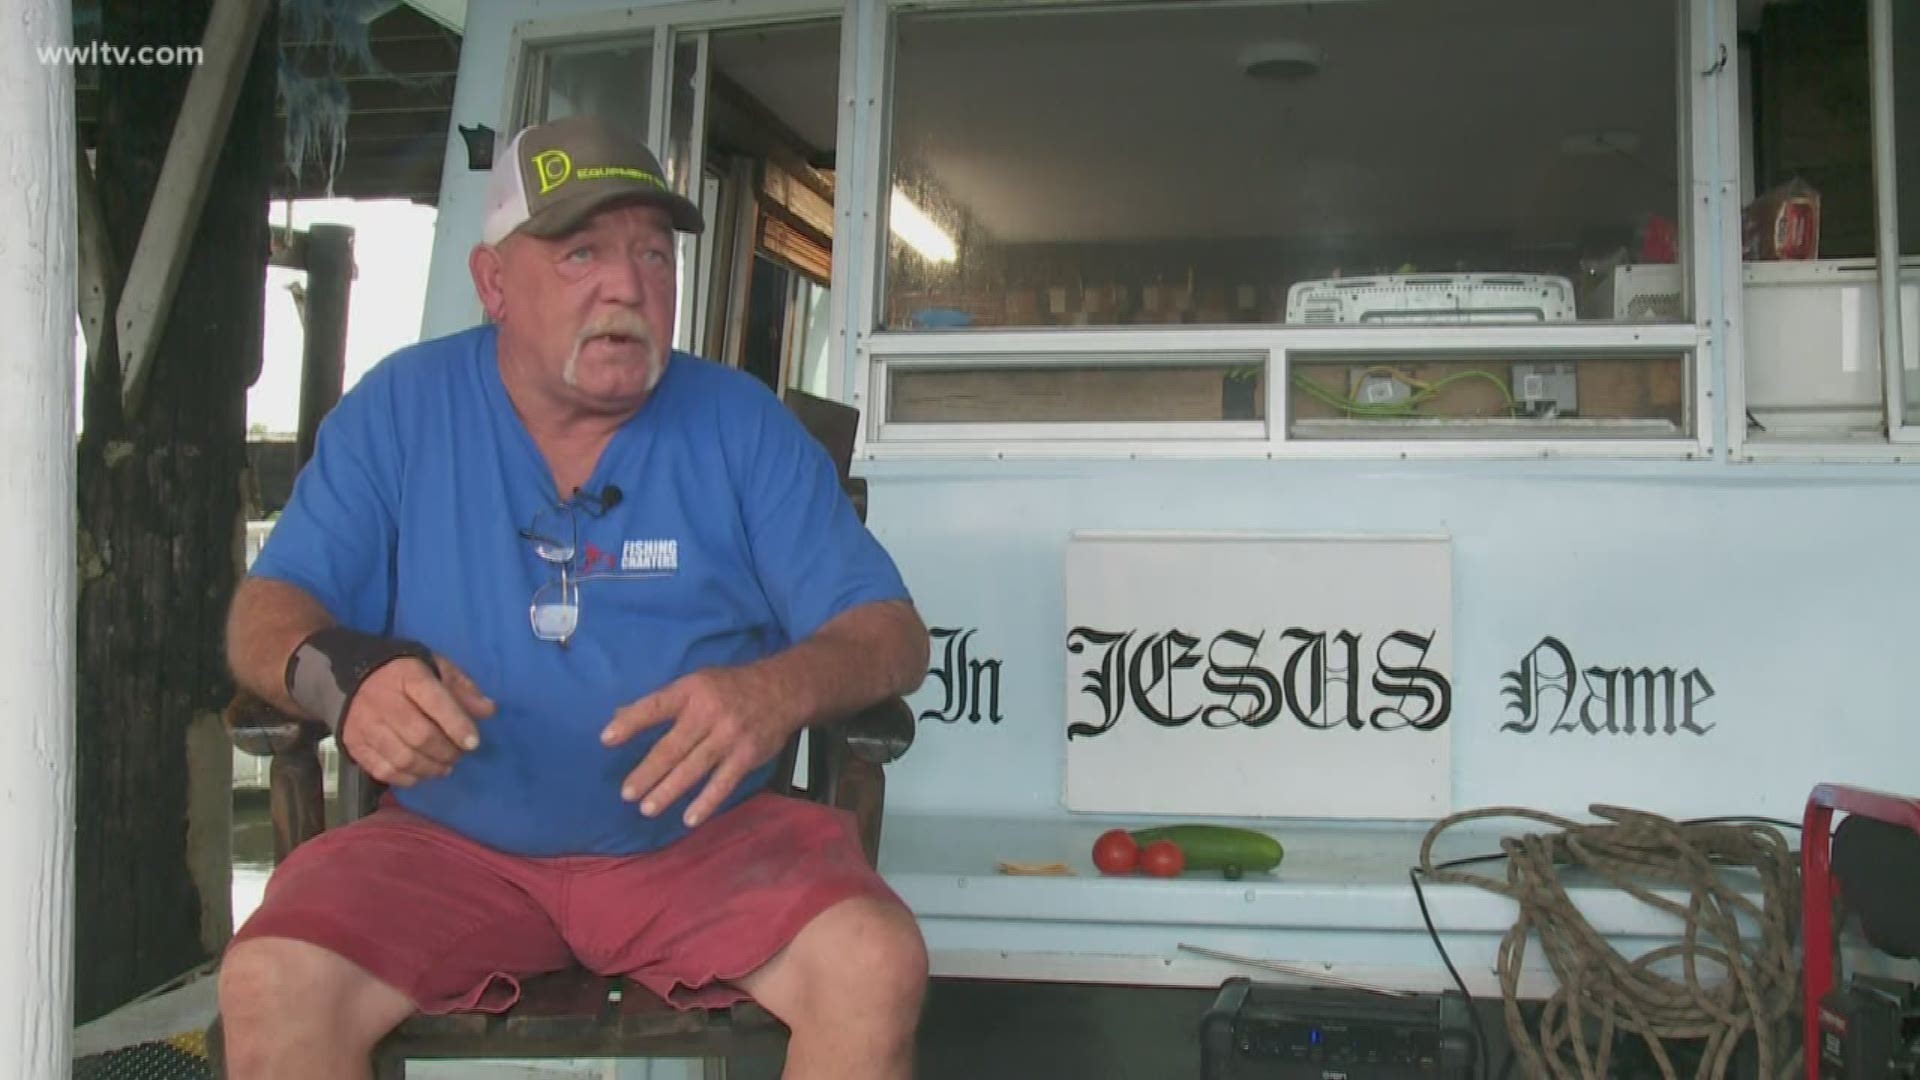 In Jean Lafitte, one man claims he is still living the dream despite losing most of his belongings during Barry. We introduced you to Jimmy 'Hound Dog' Chaisson a few days ago as he was getting ready for the storm from his house boat.